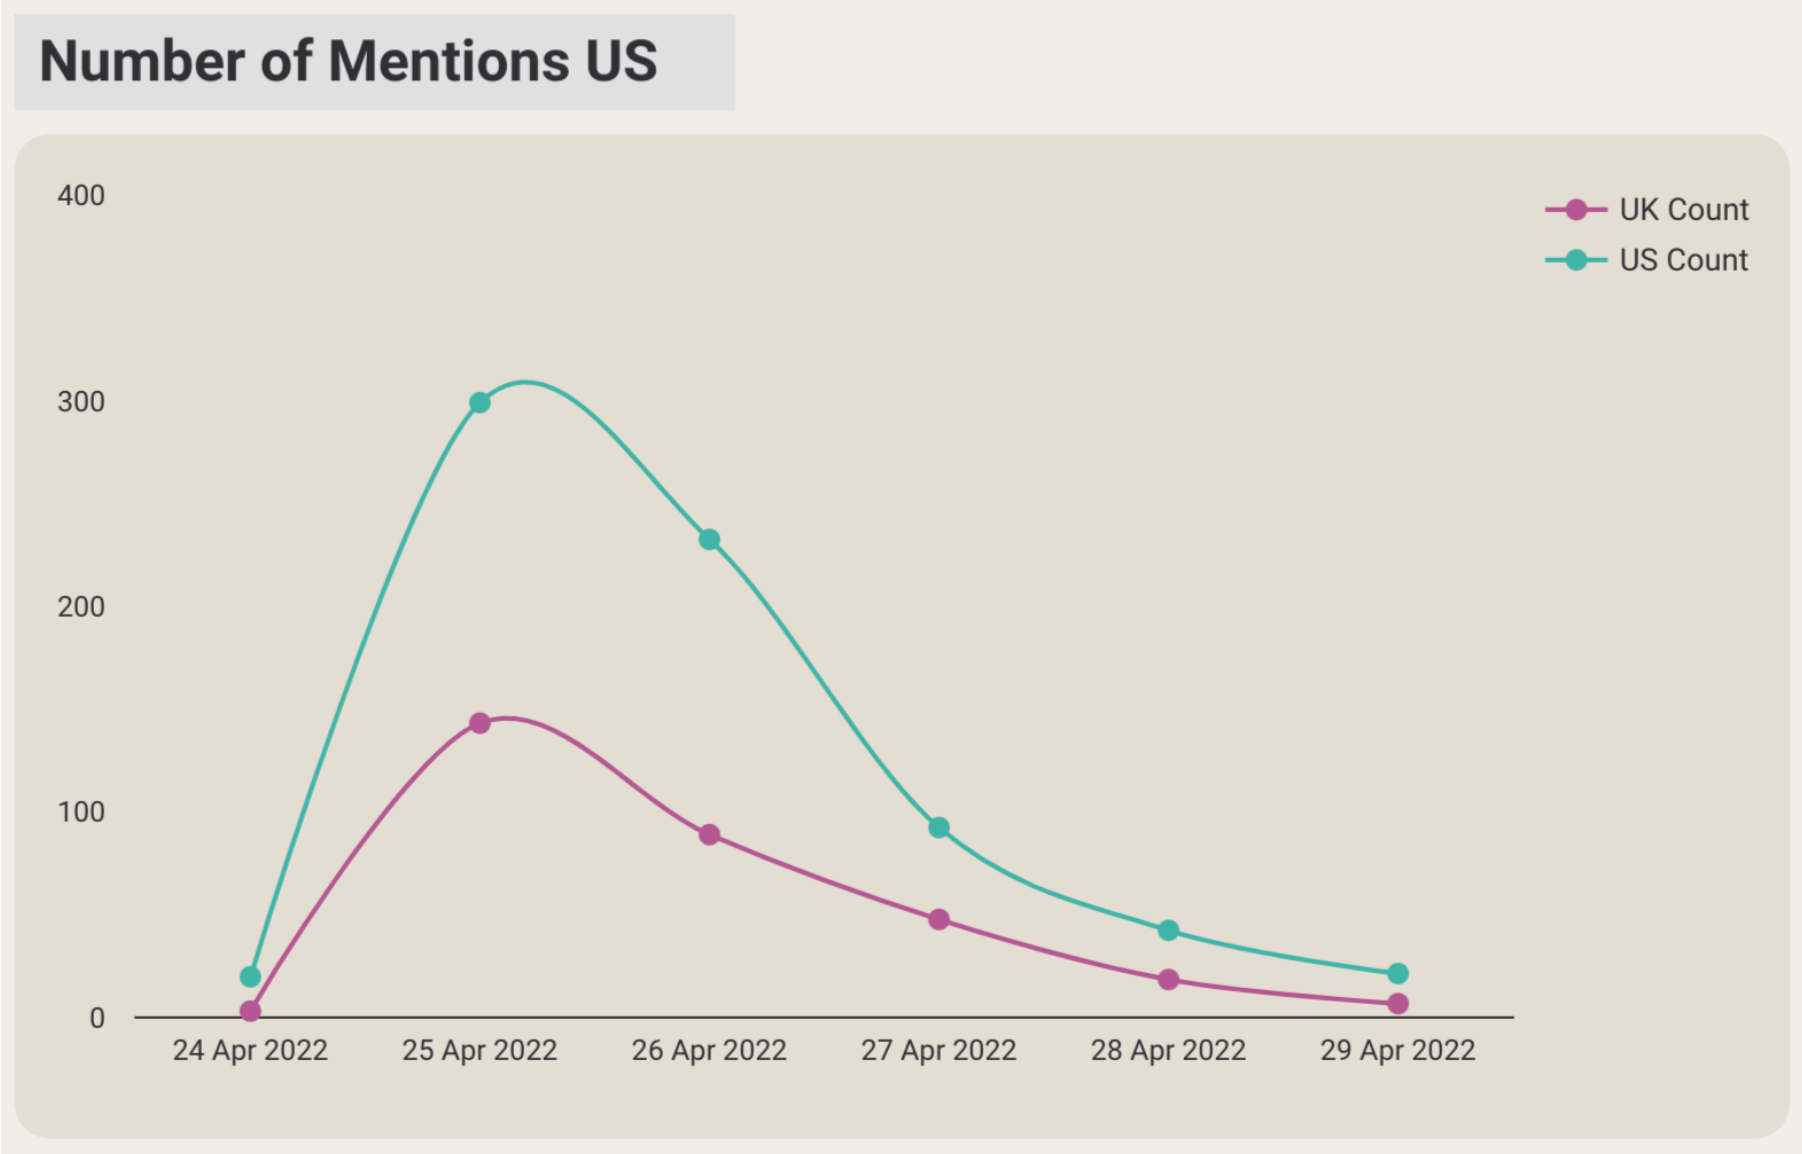 Figure 1: Total number of mentions in the US per 1M users.